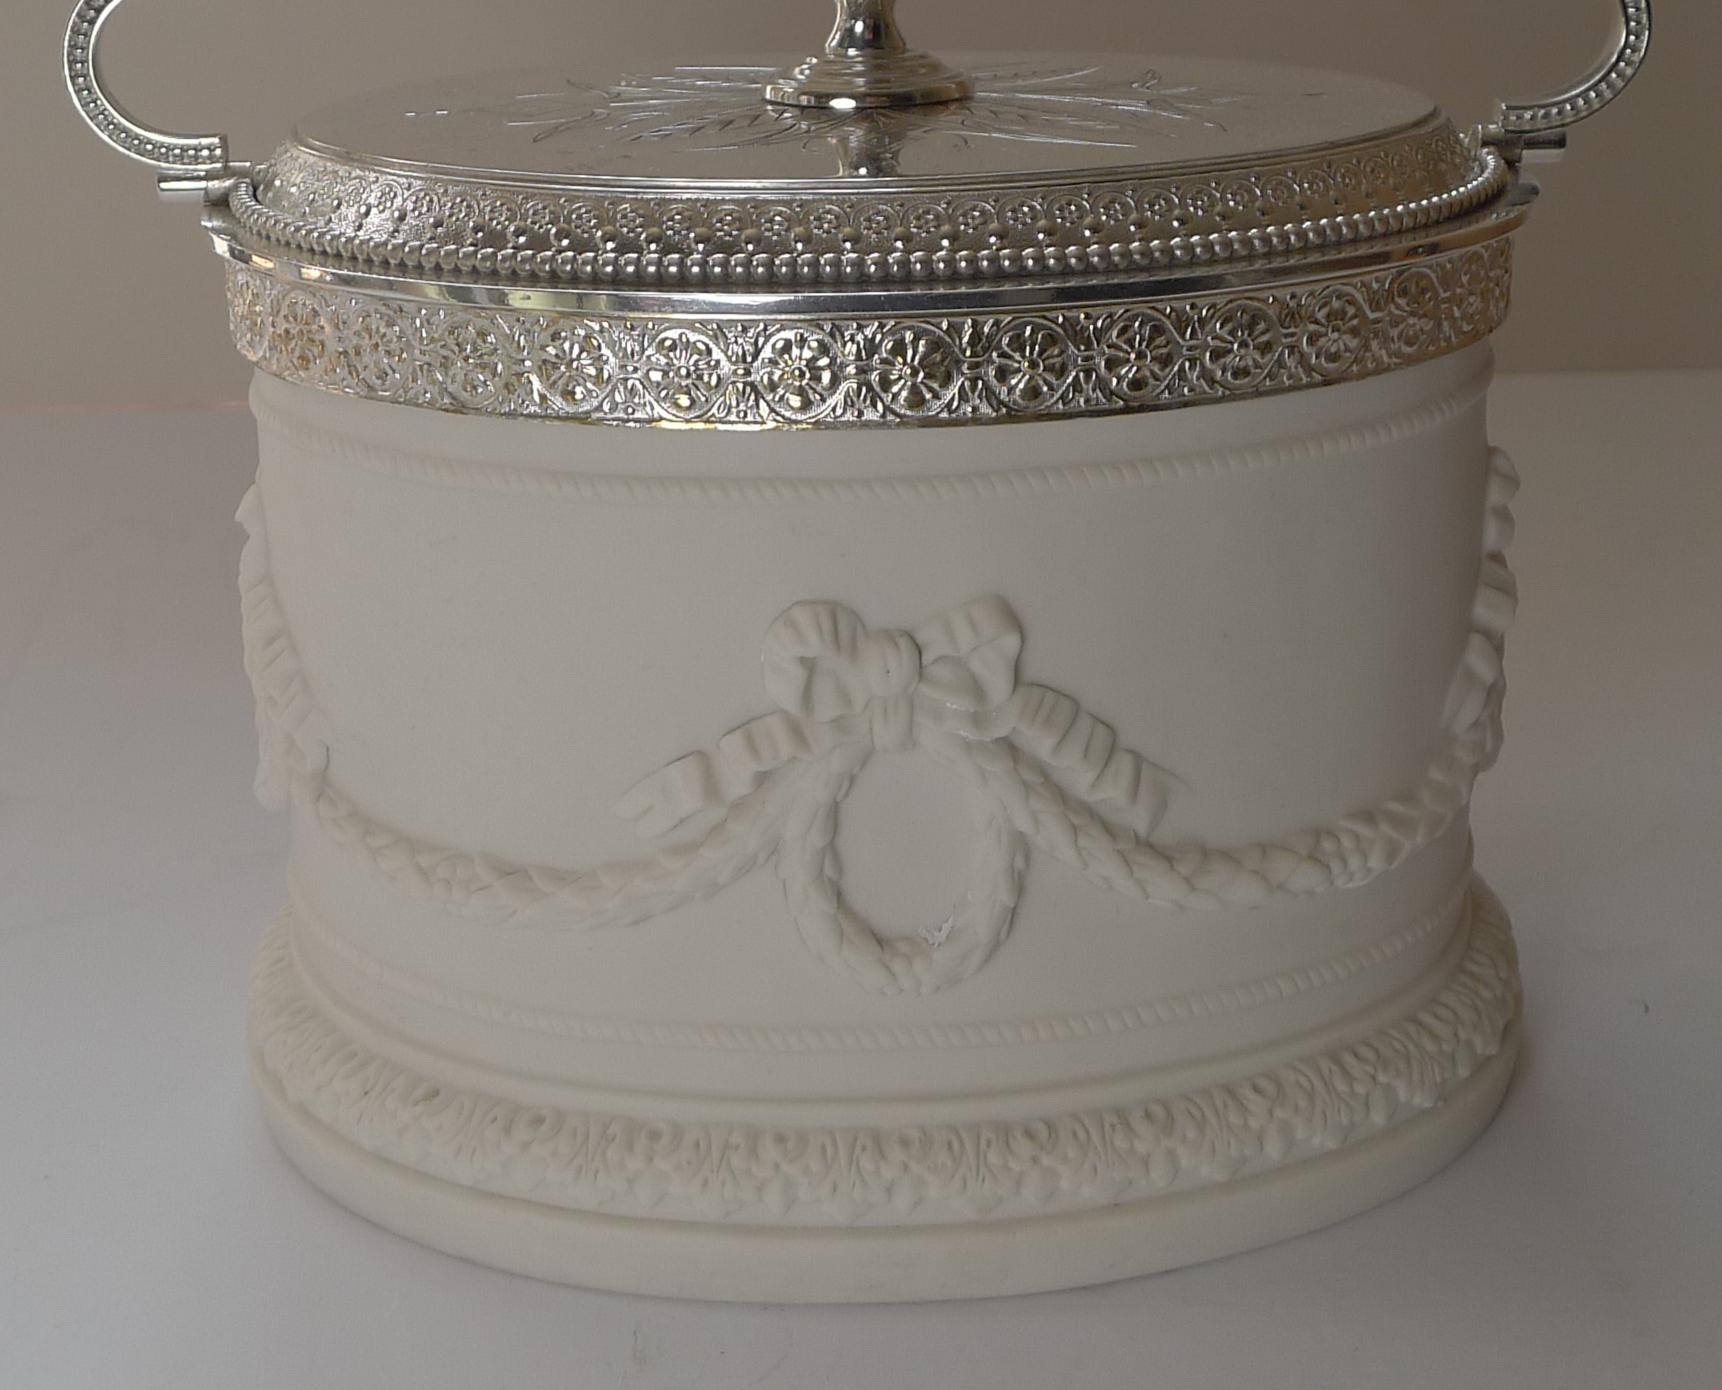 A rarely found Victorian biscuit box made from Parian with silver plated fittings dating to c.1880. 

Parian ware is a type of biscuit porcelain imitating marble. It was developed around 1845 by the Staffordshire pottery manufacturer Mintons, and